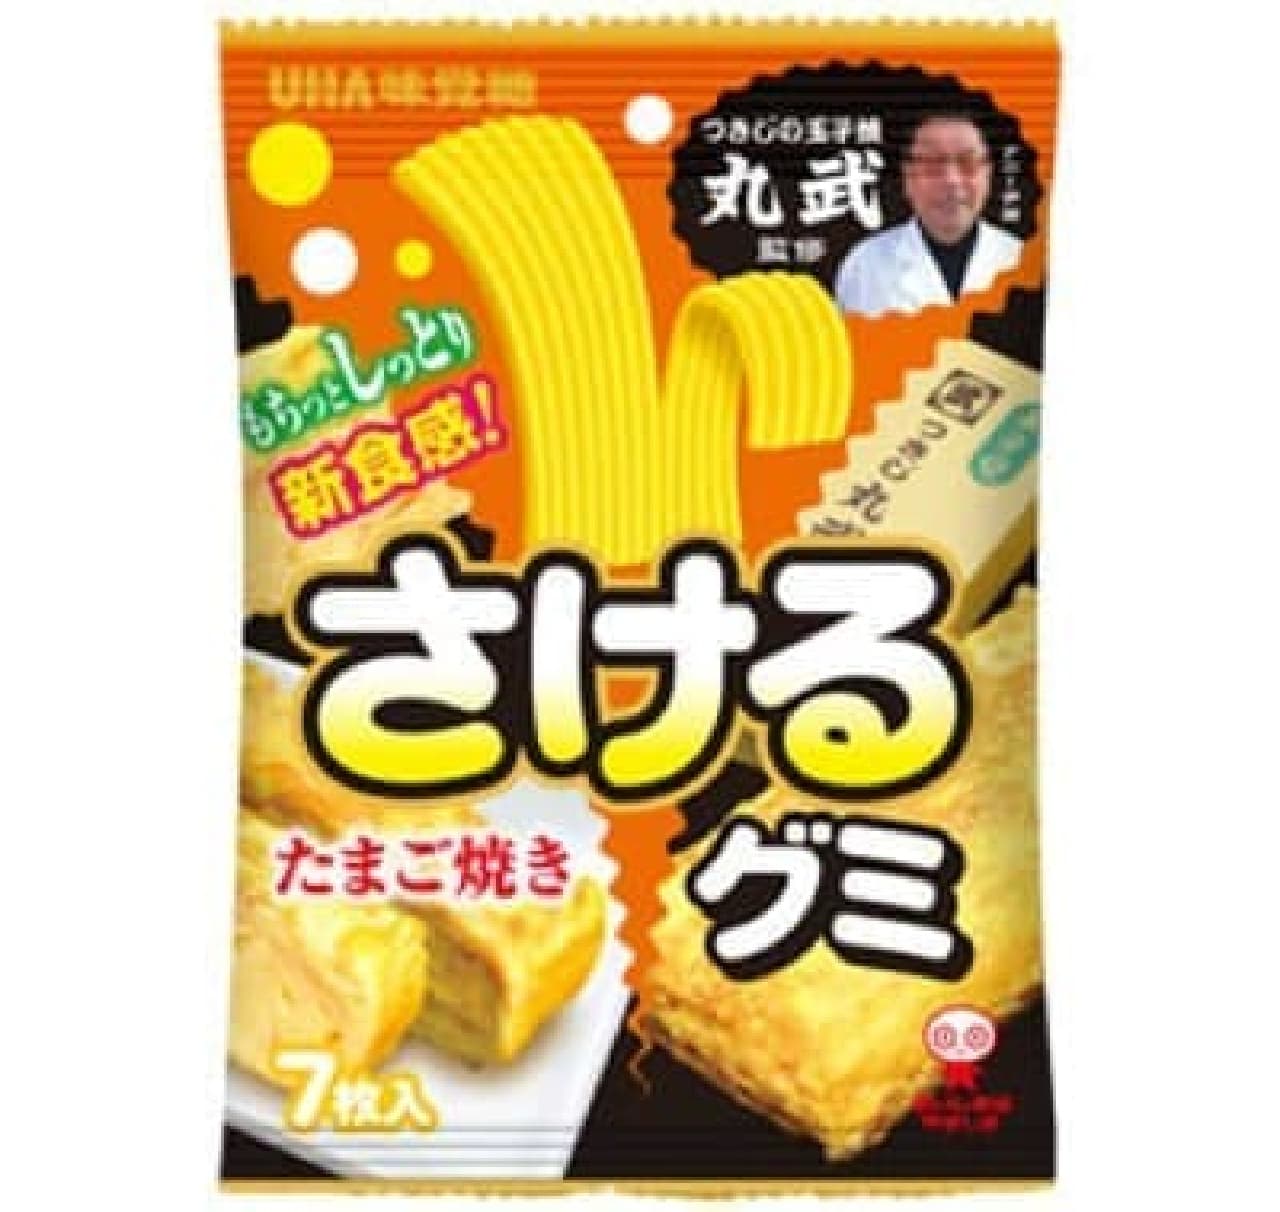 "Tamagoyaki flavored" gummy candies are here!